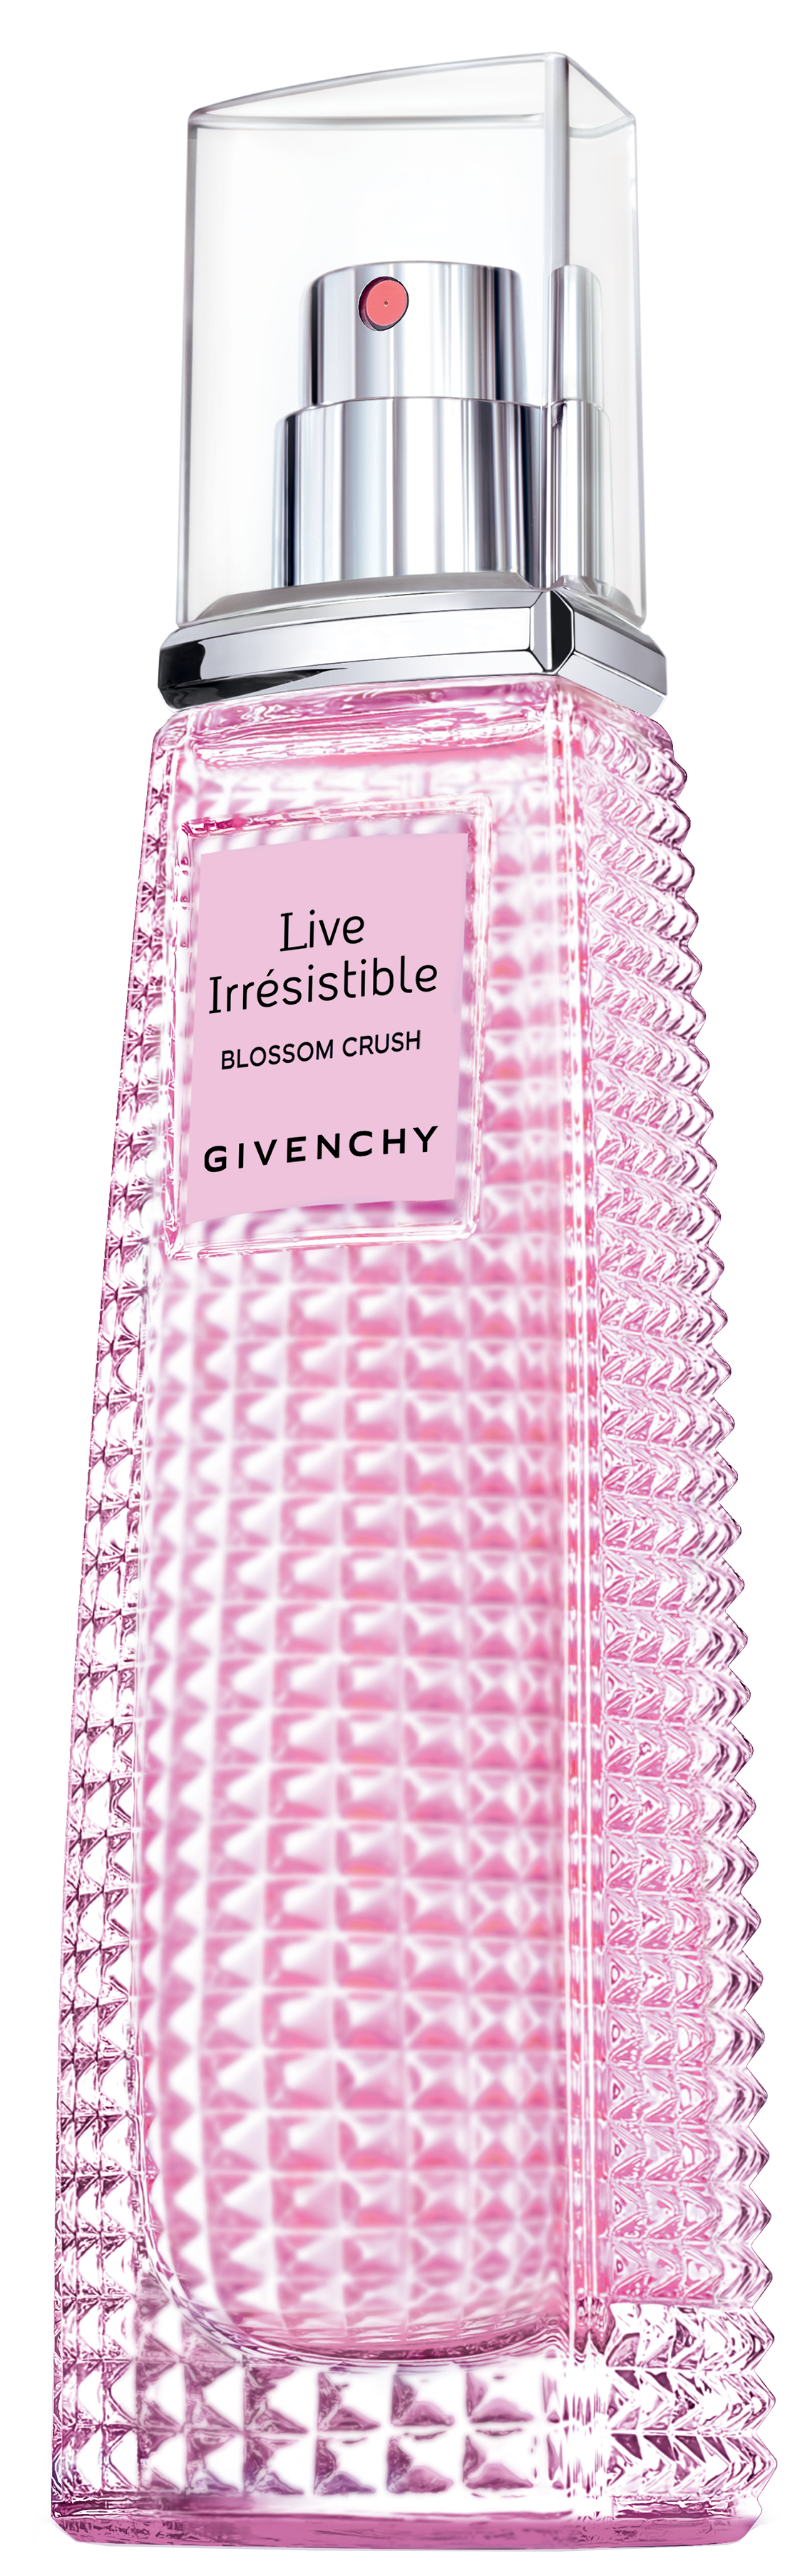 Givenchy - Live Irresistible Blossom Crush EdT 50 ml